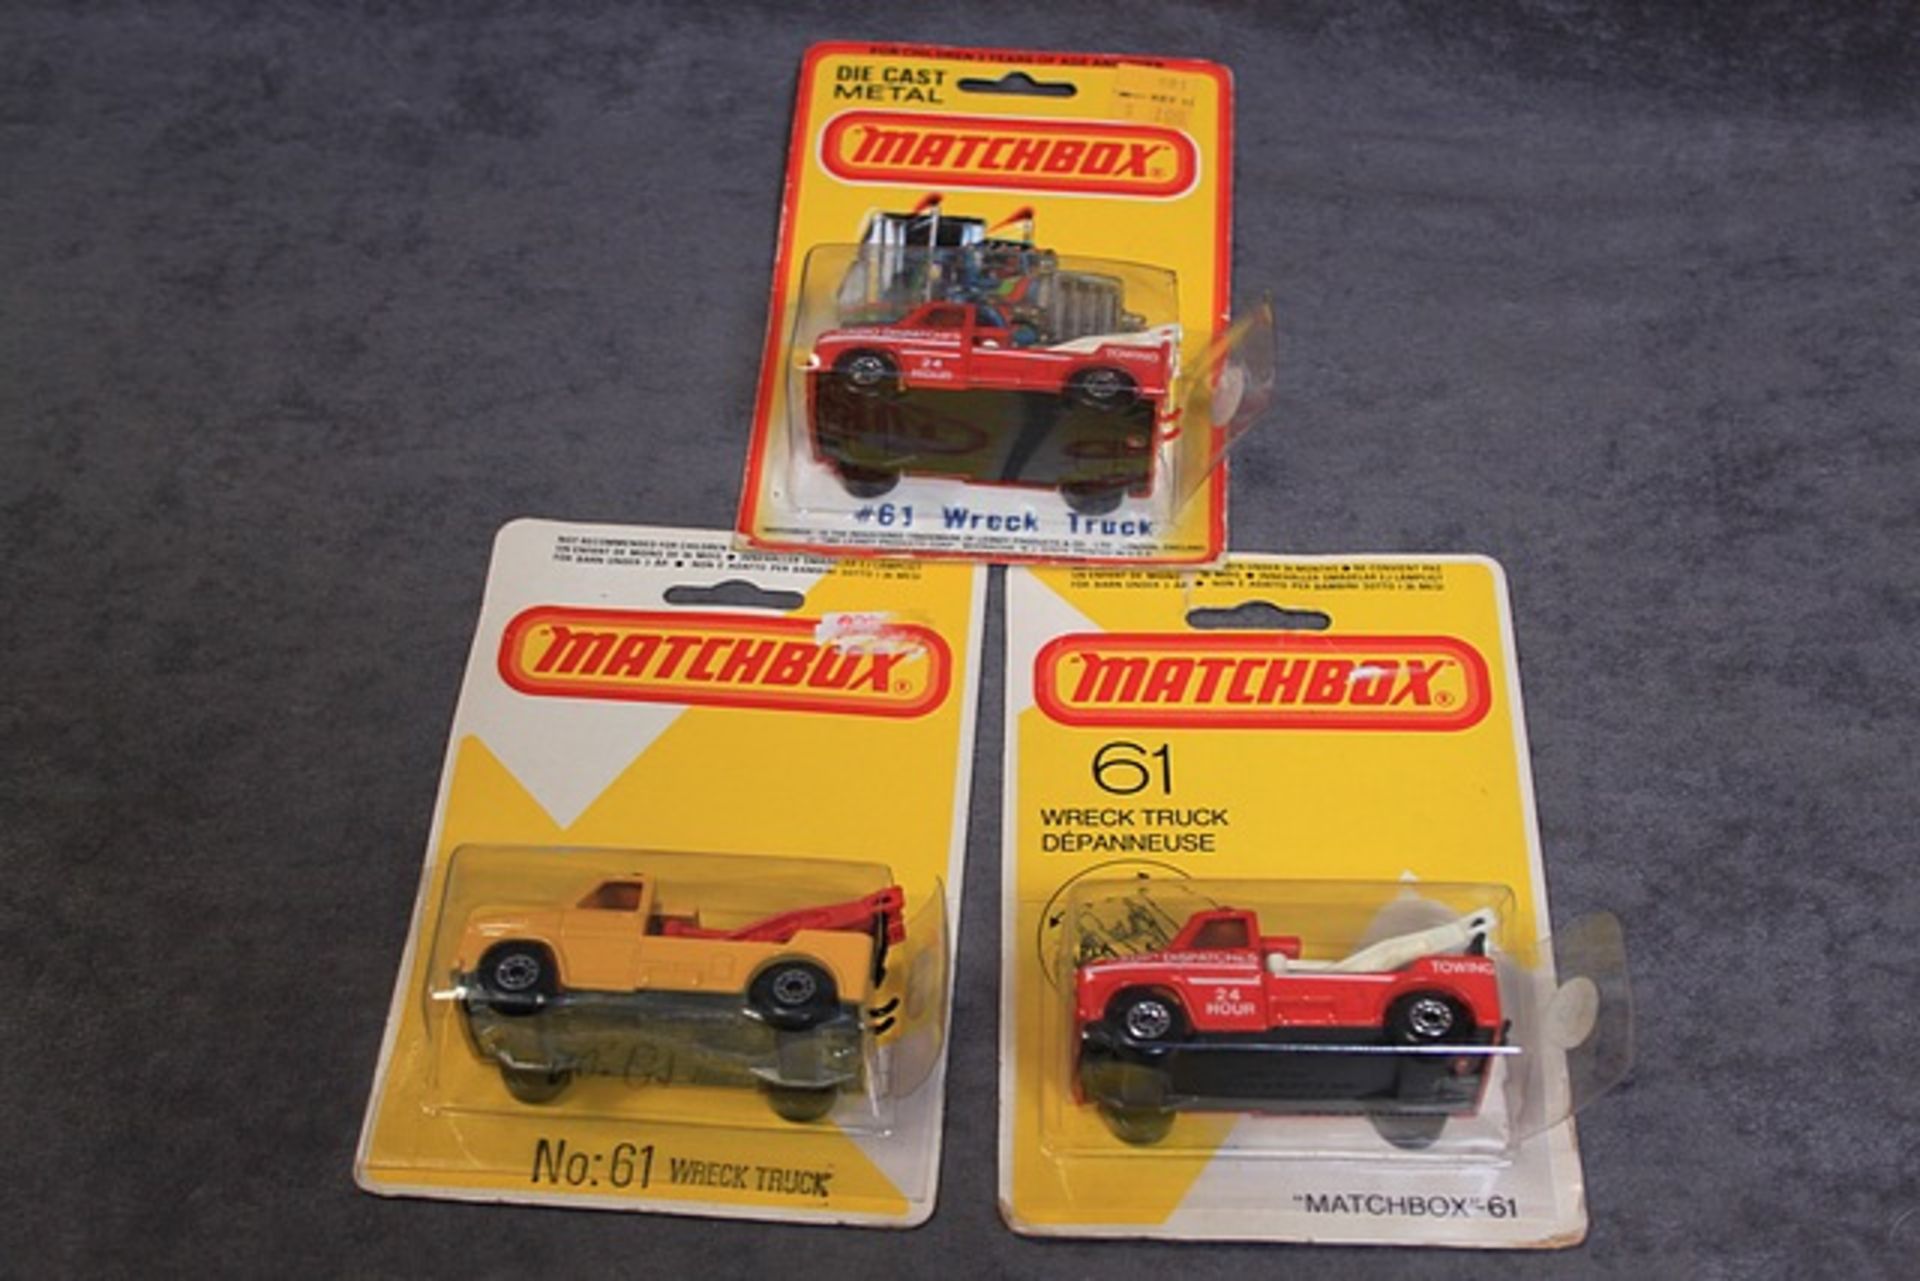 3 X Matchbox Diecast Models #61 1 X Red Body With Black Hook 1 X Red Body With Red Hook And 1 X Dark - Image 2 of 2